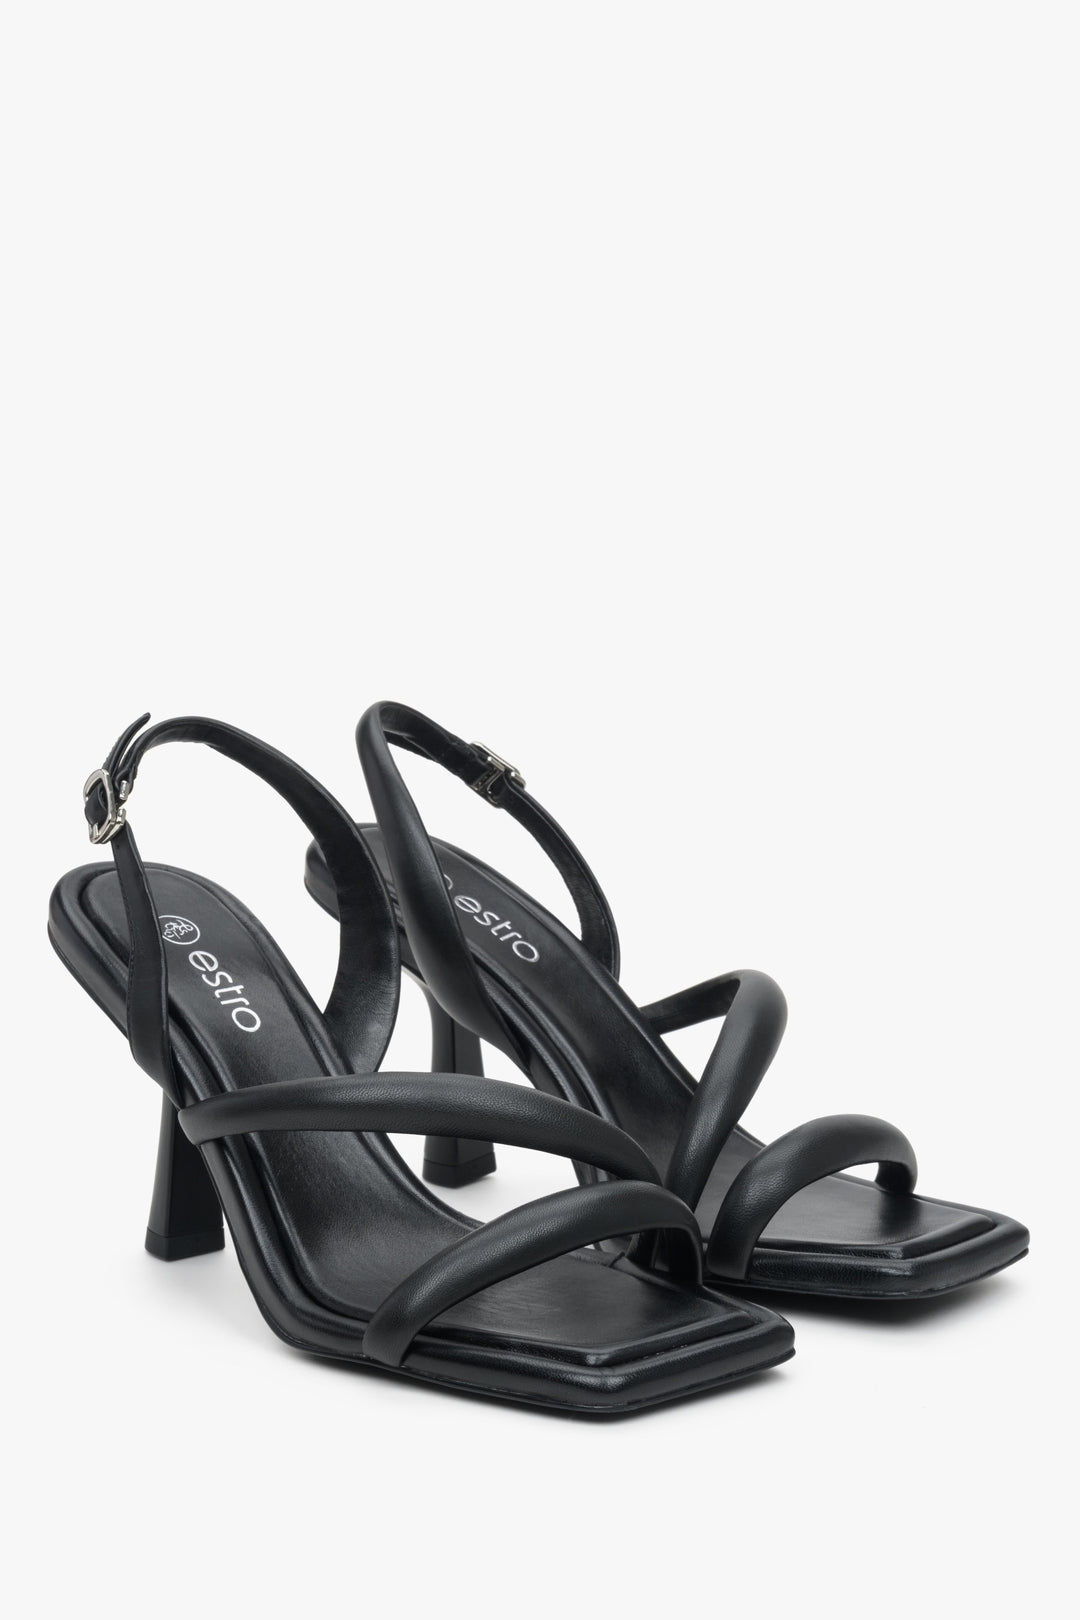 Black leather women's strappy sandals.